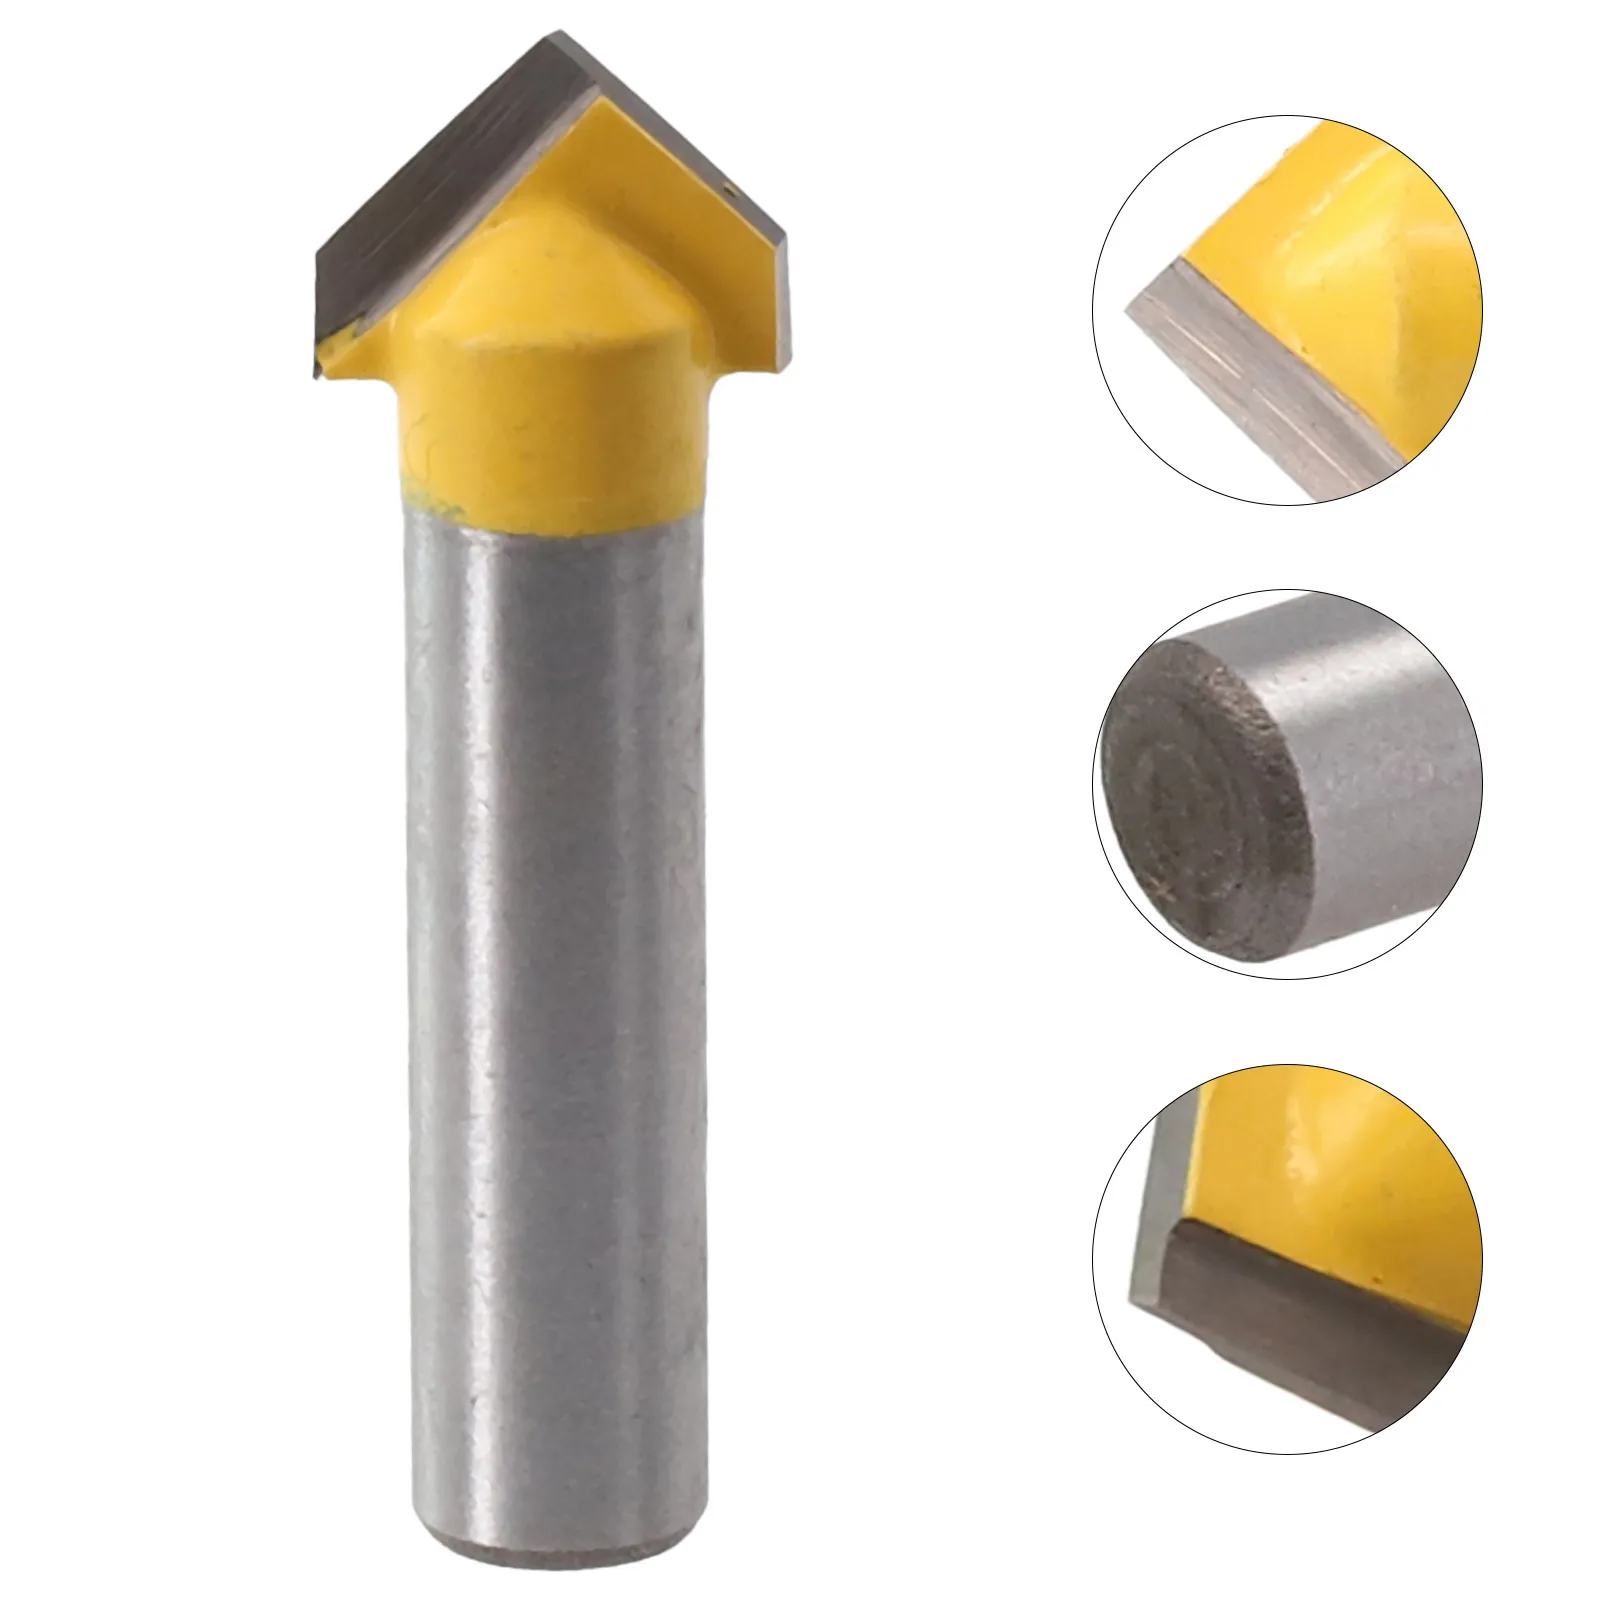 

Brand New Milling Cutter Engraving Woodworking Carving 1Pc 1pcs 8mm Shank 90 Degree CNC Engraving Double-edged